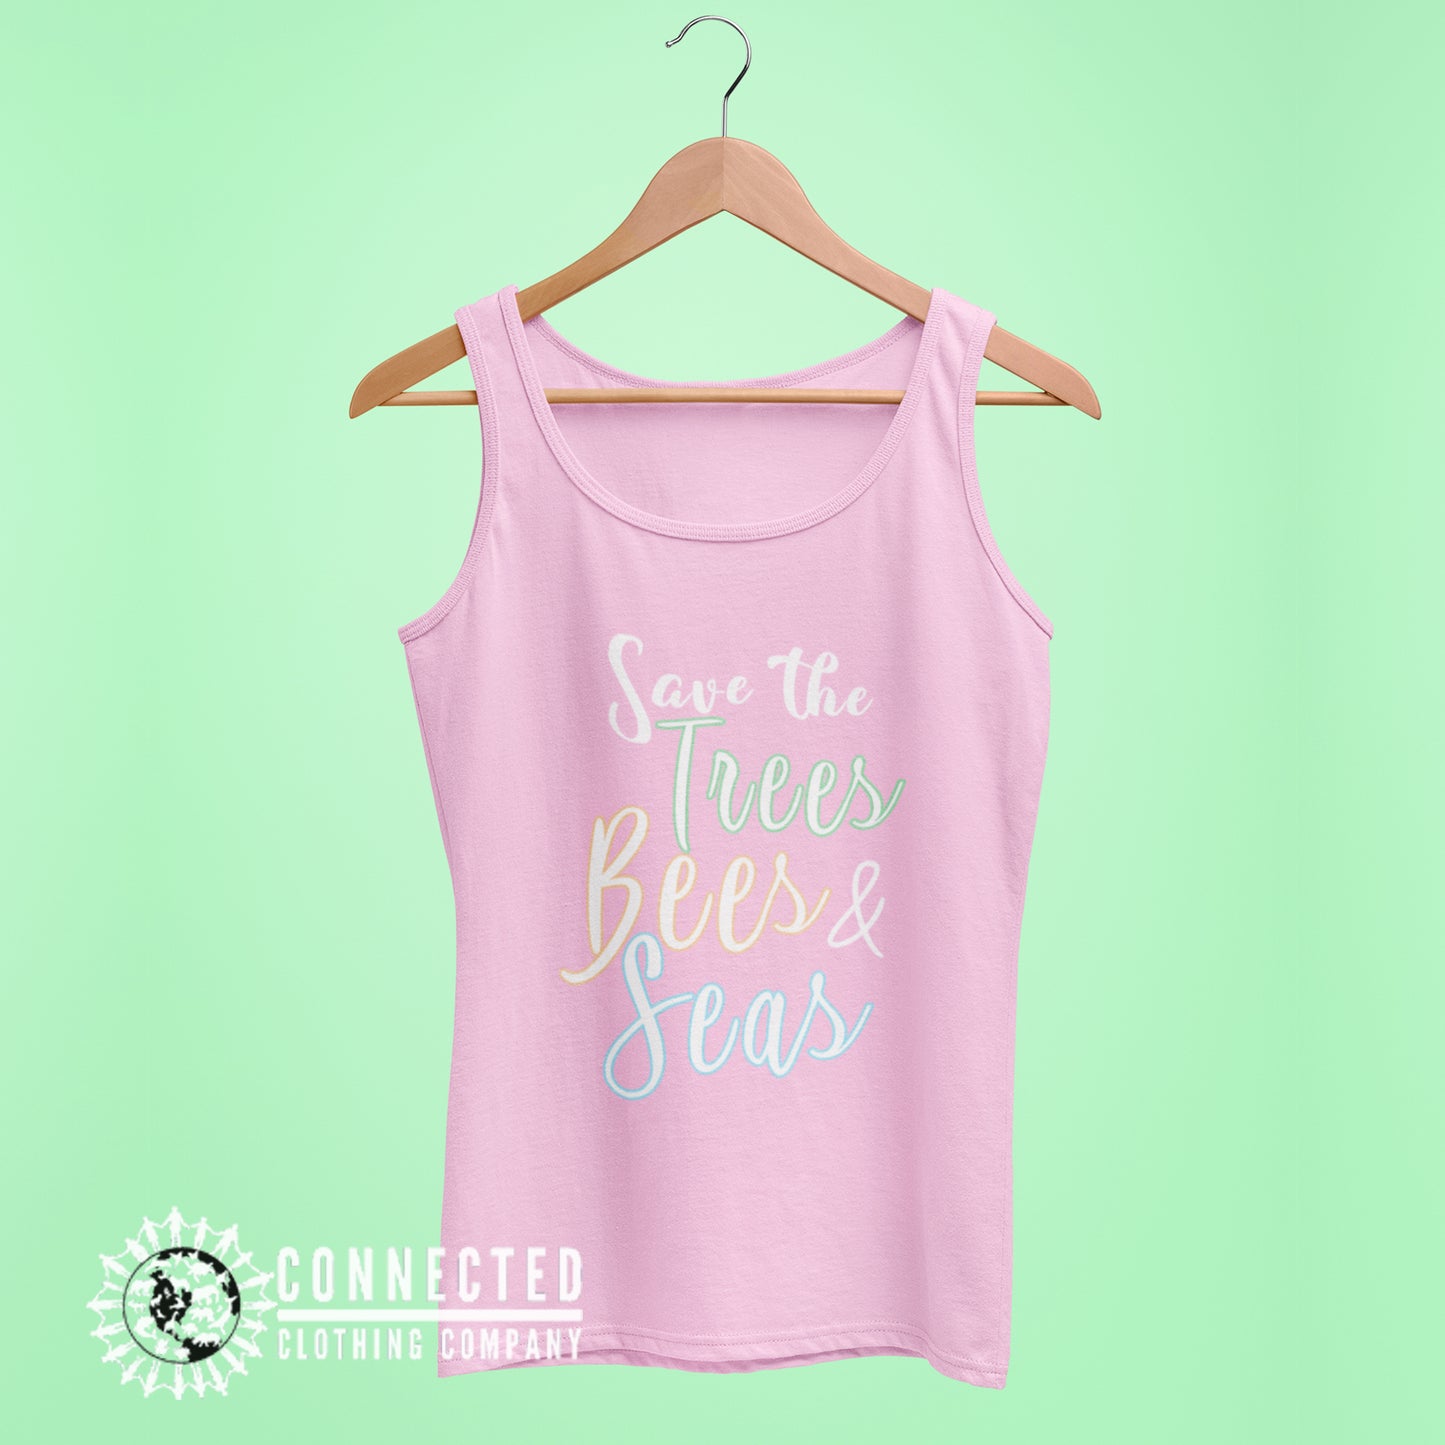 Pink Save The Trees Bees And Seas Women's Relaxed Tank Top - Connected Clothing Company - Ethically and Sustainably Made - 10% donated to Mission Blue ocean conservation